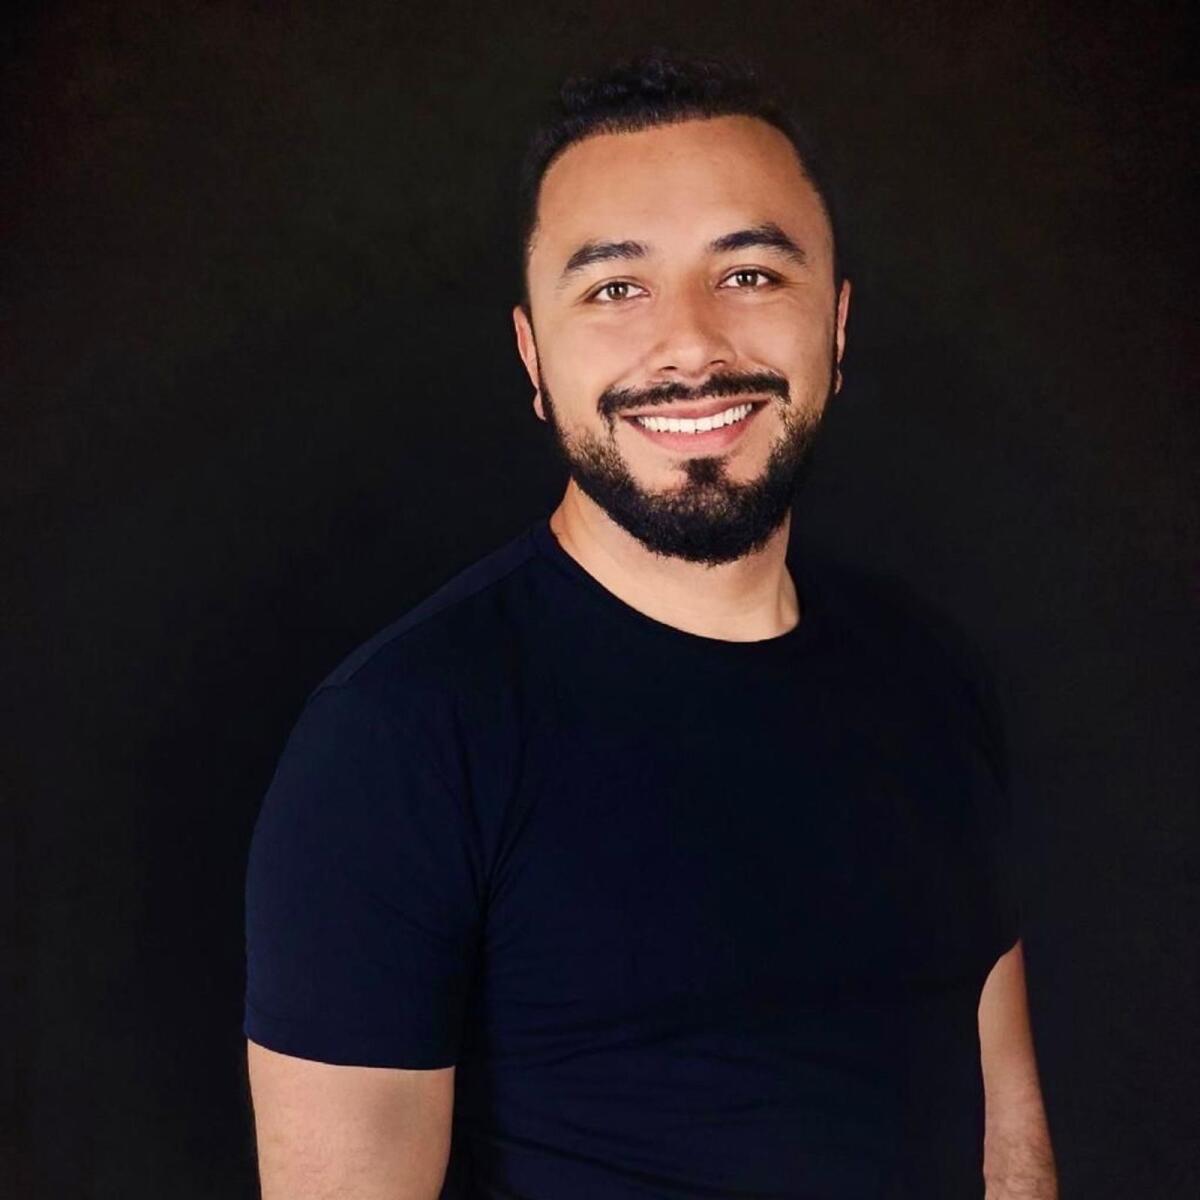 Andres Meneses, founder of Crypto Ogs